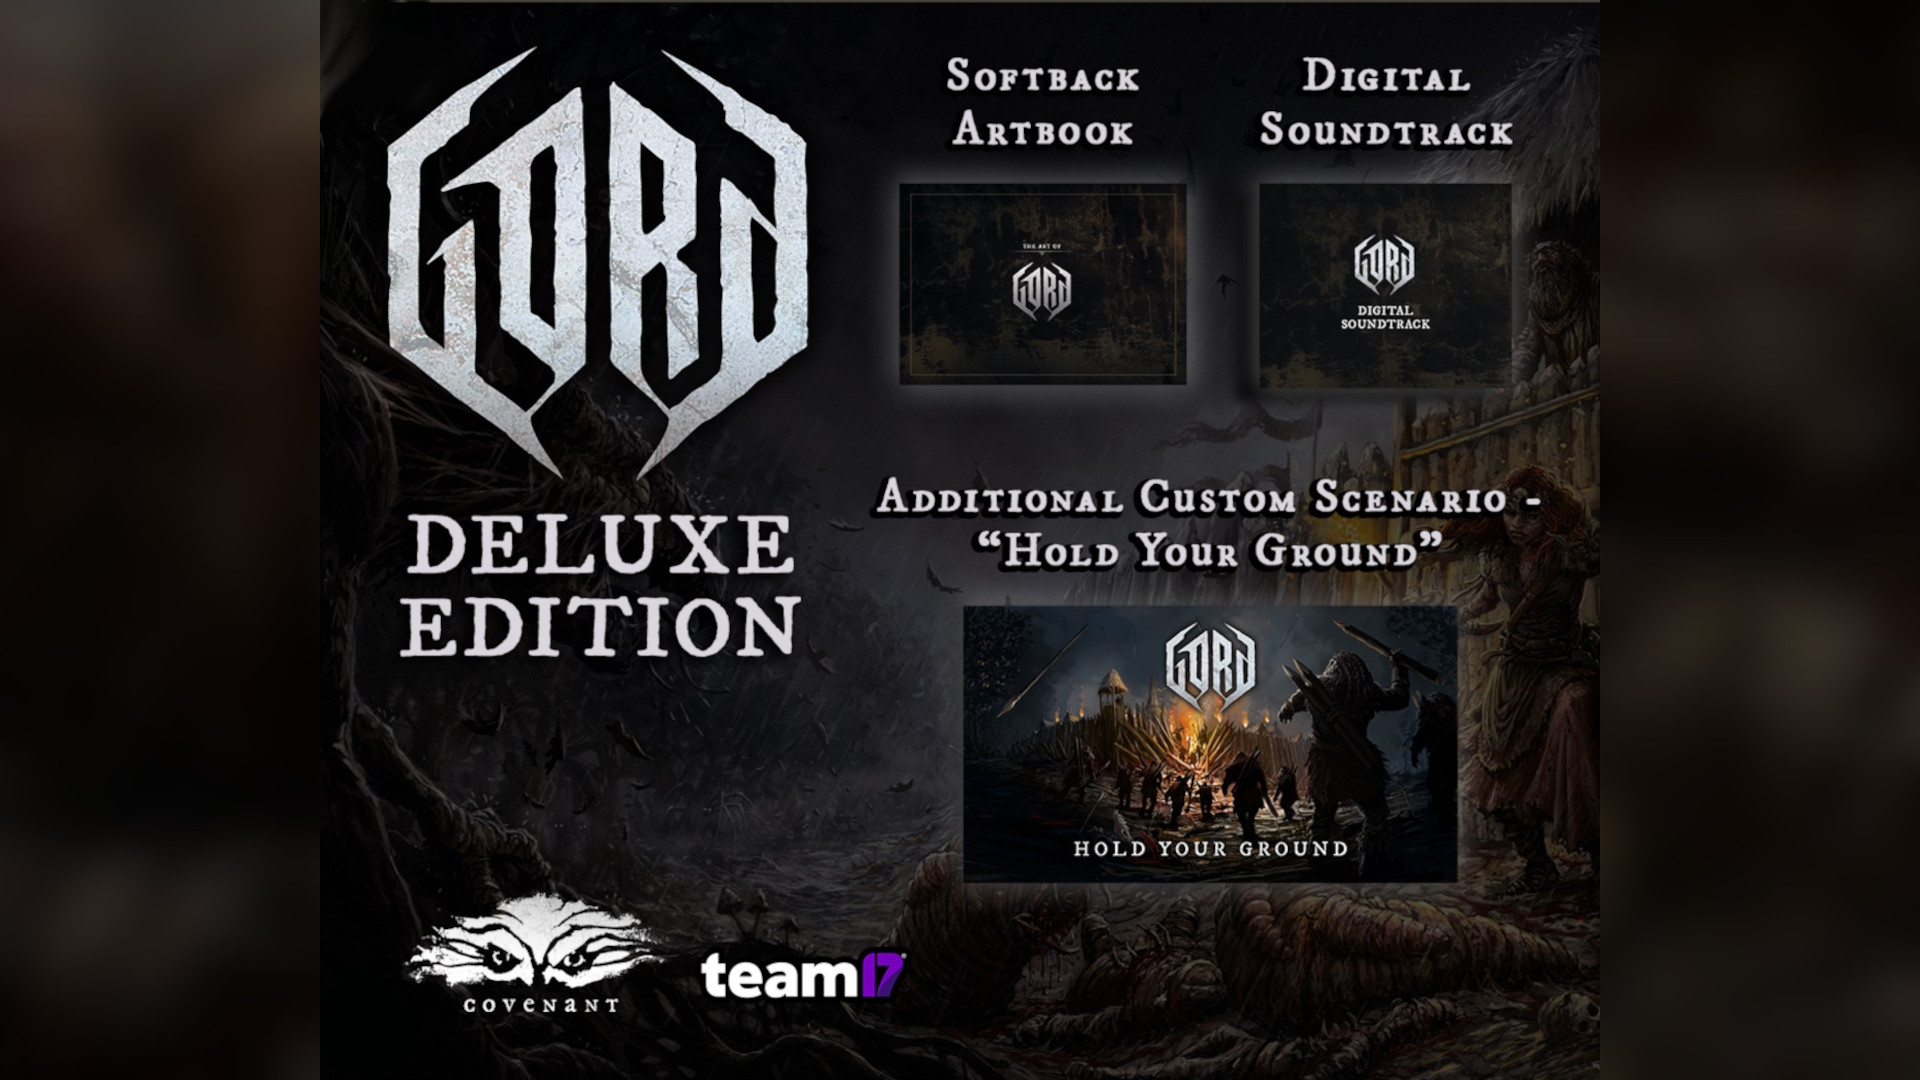 Gord Deluxe Edition Steam CD Key, $17.48